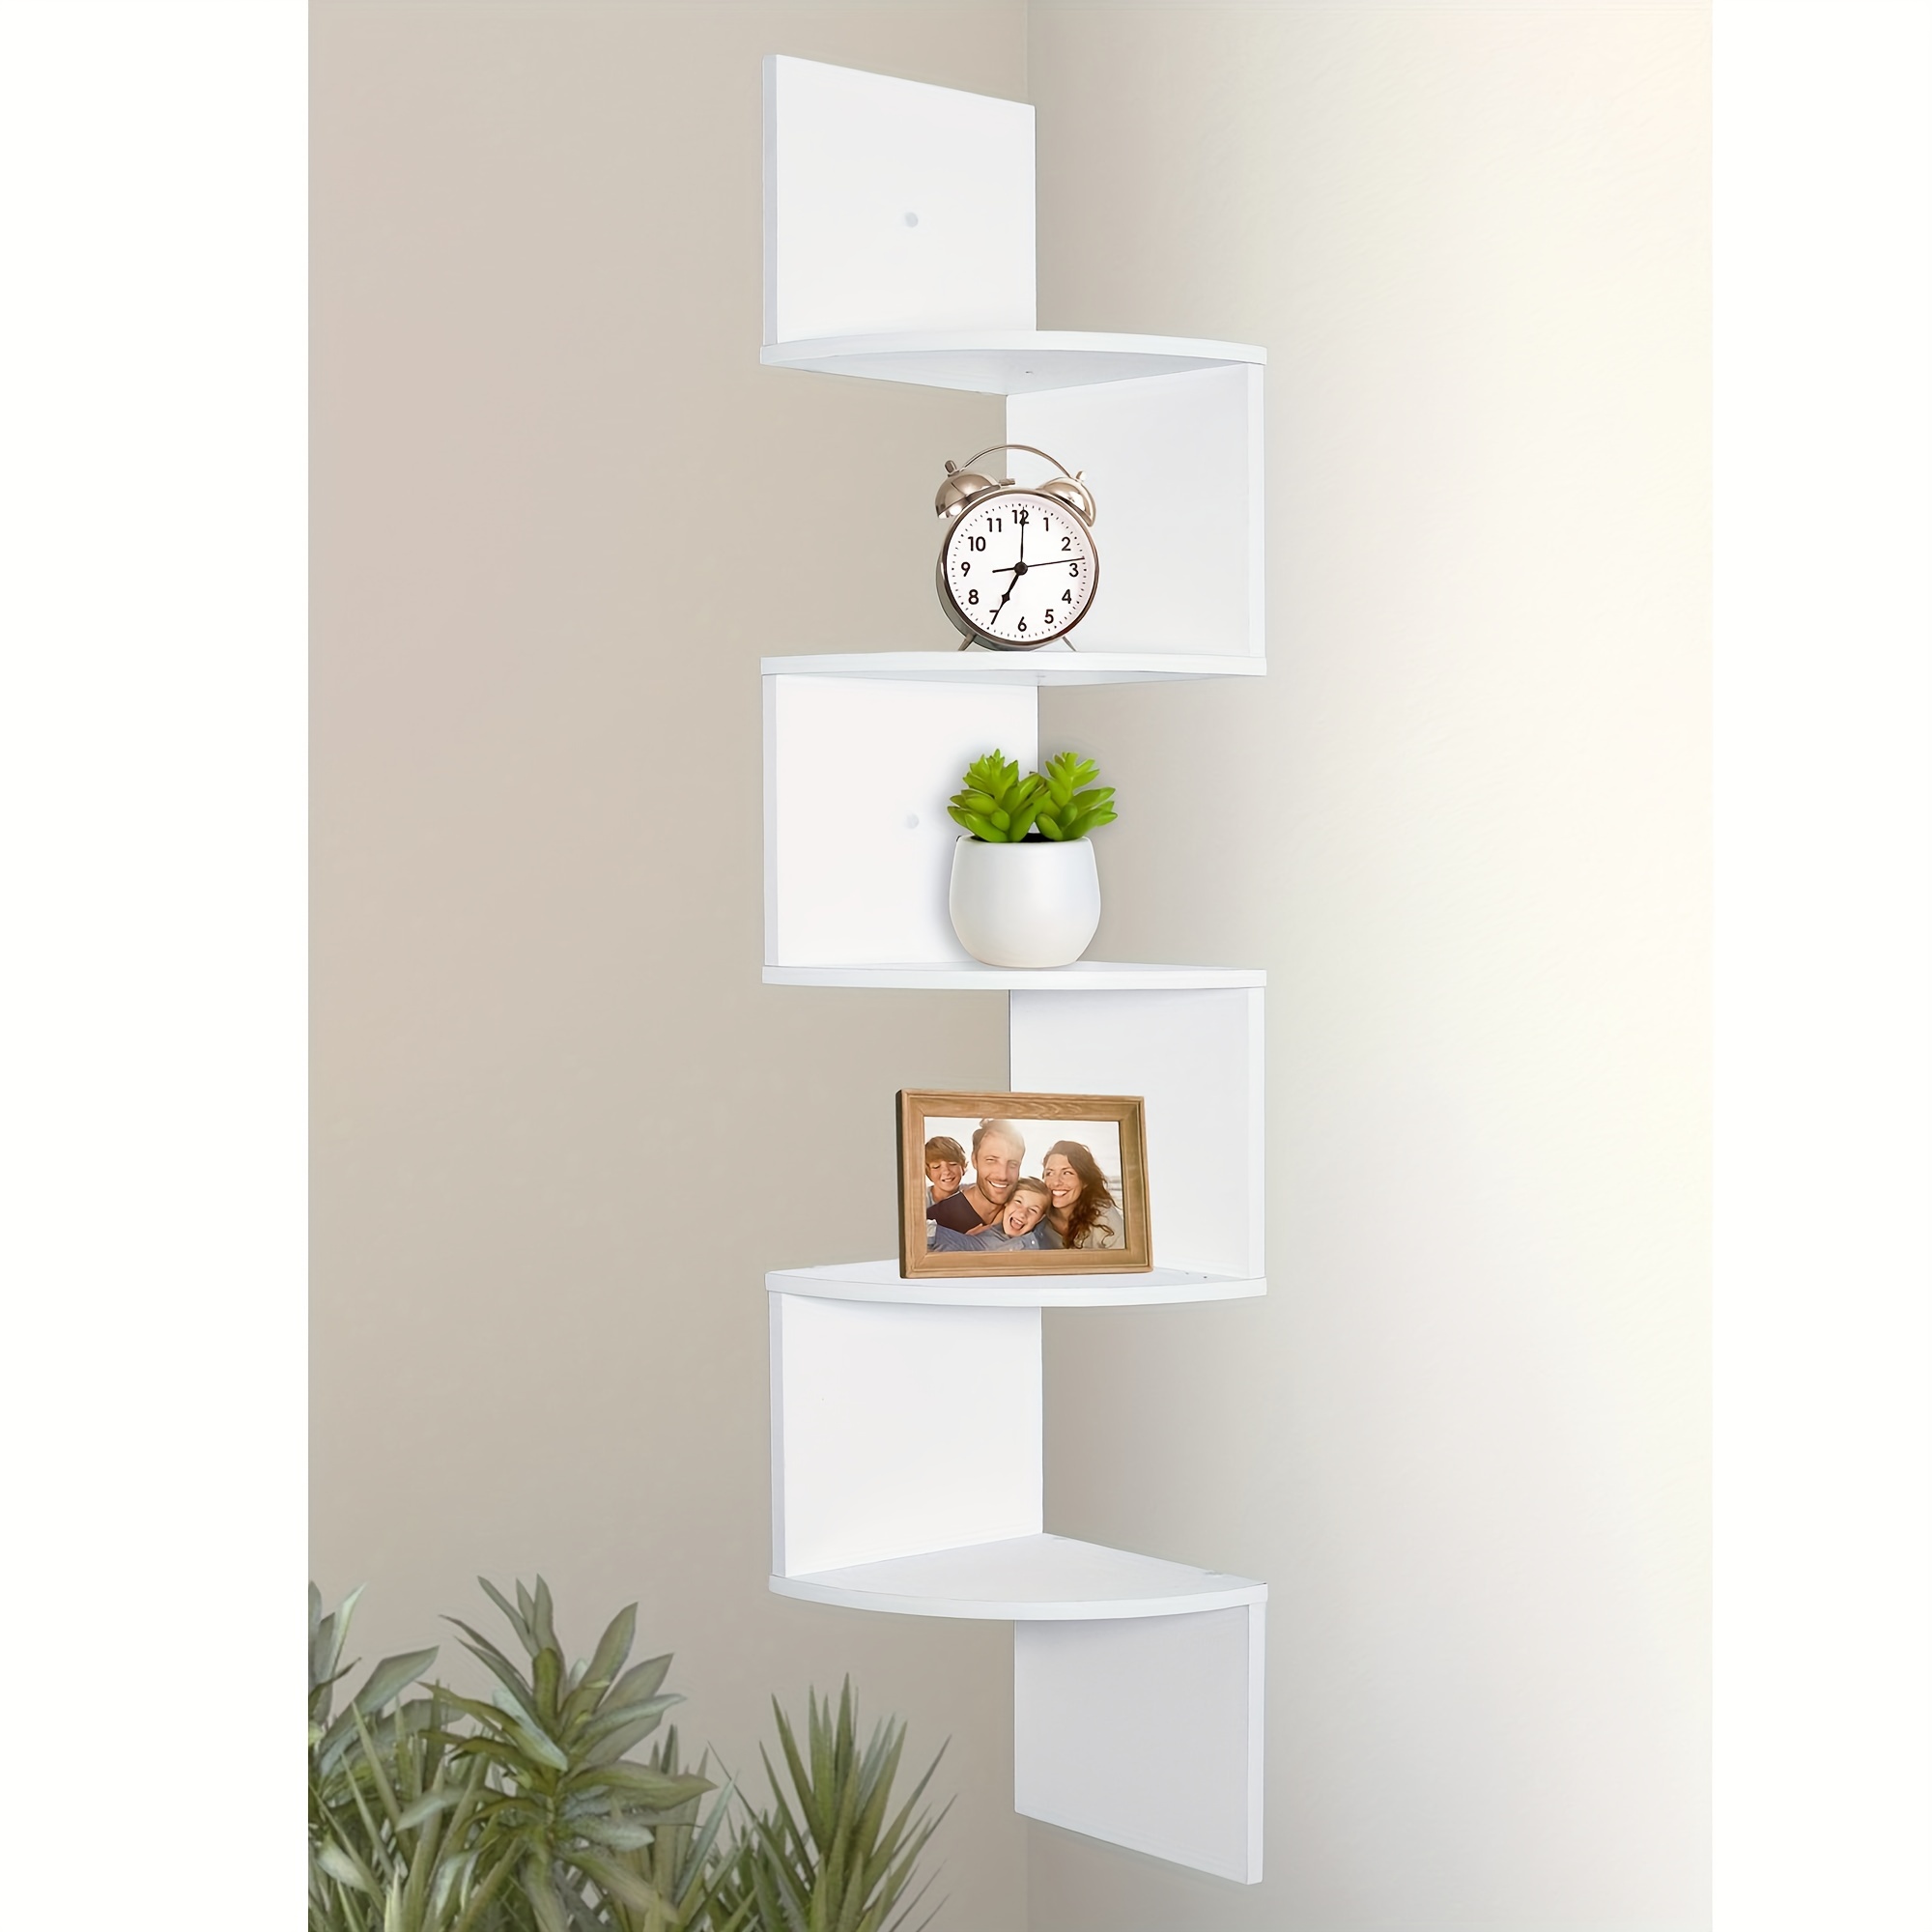 1pc Wall Mounted Storage Shelf, Corner Shelf For Holding Boxes, Flower  Pots, Candles & Other Decorations To Save Space In Bedroom, Living Room,  Home, Dormitory. Ideal Organizer For Room Decoration